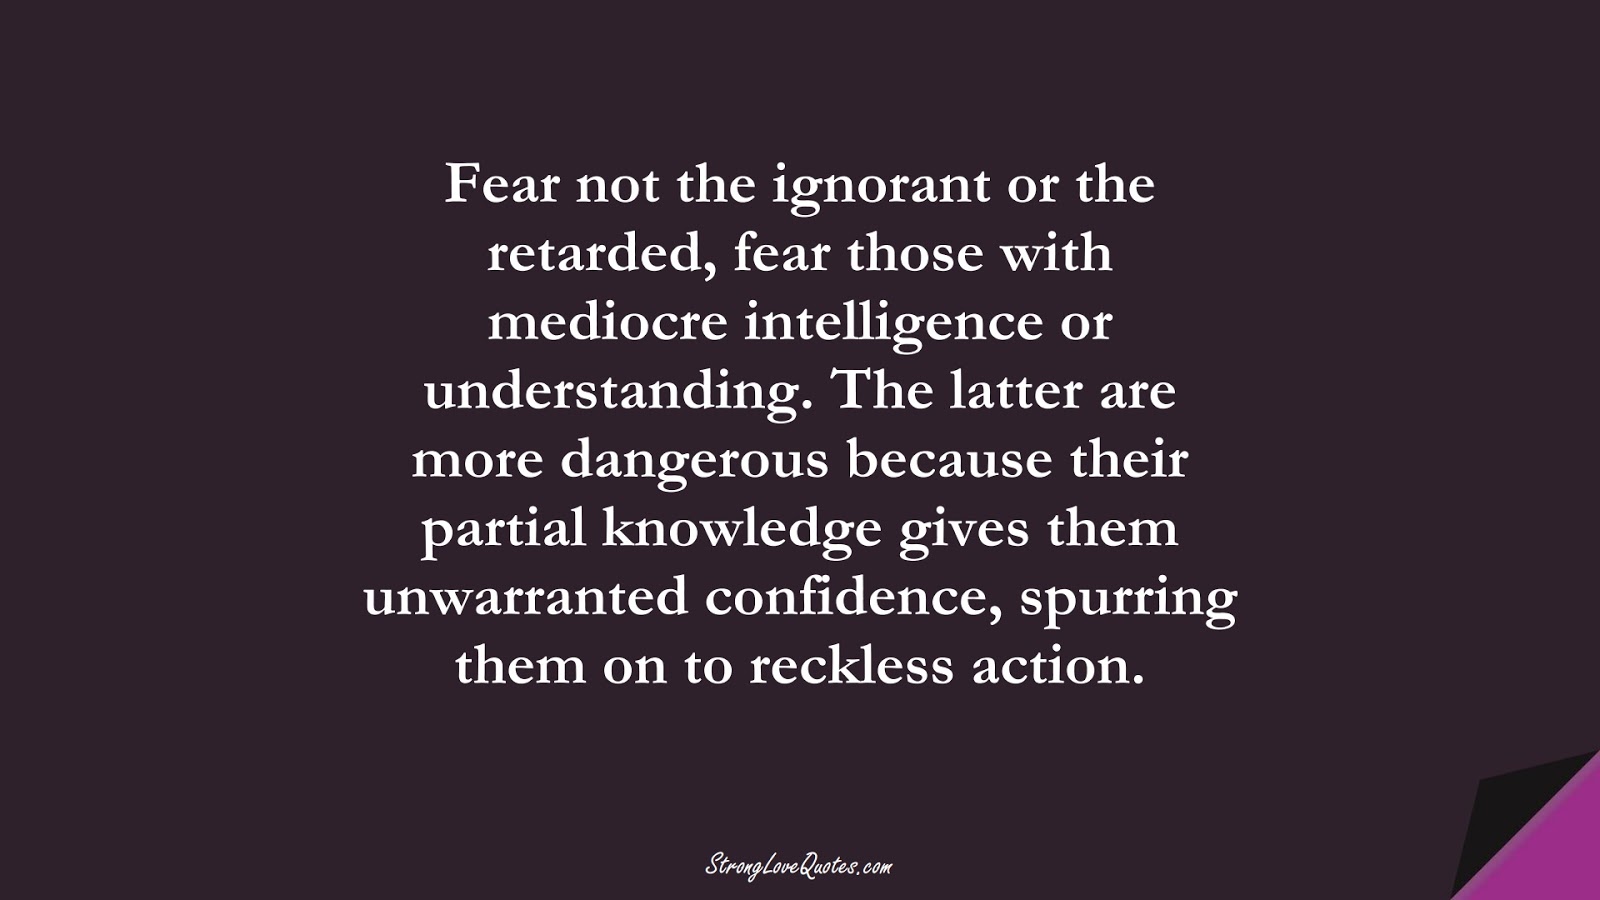 Fear not the ignorant or the retarded, fear those with mediocre intelligence or understanding. The latter are more dangerous because their partial knowledge gives them unwarranted confidence, spurring them on to reckless action.FALSE